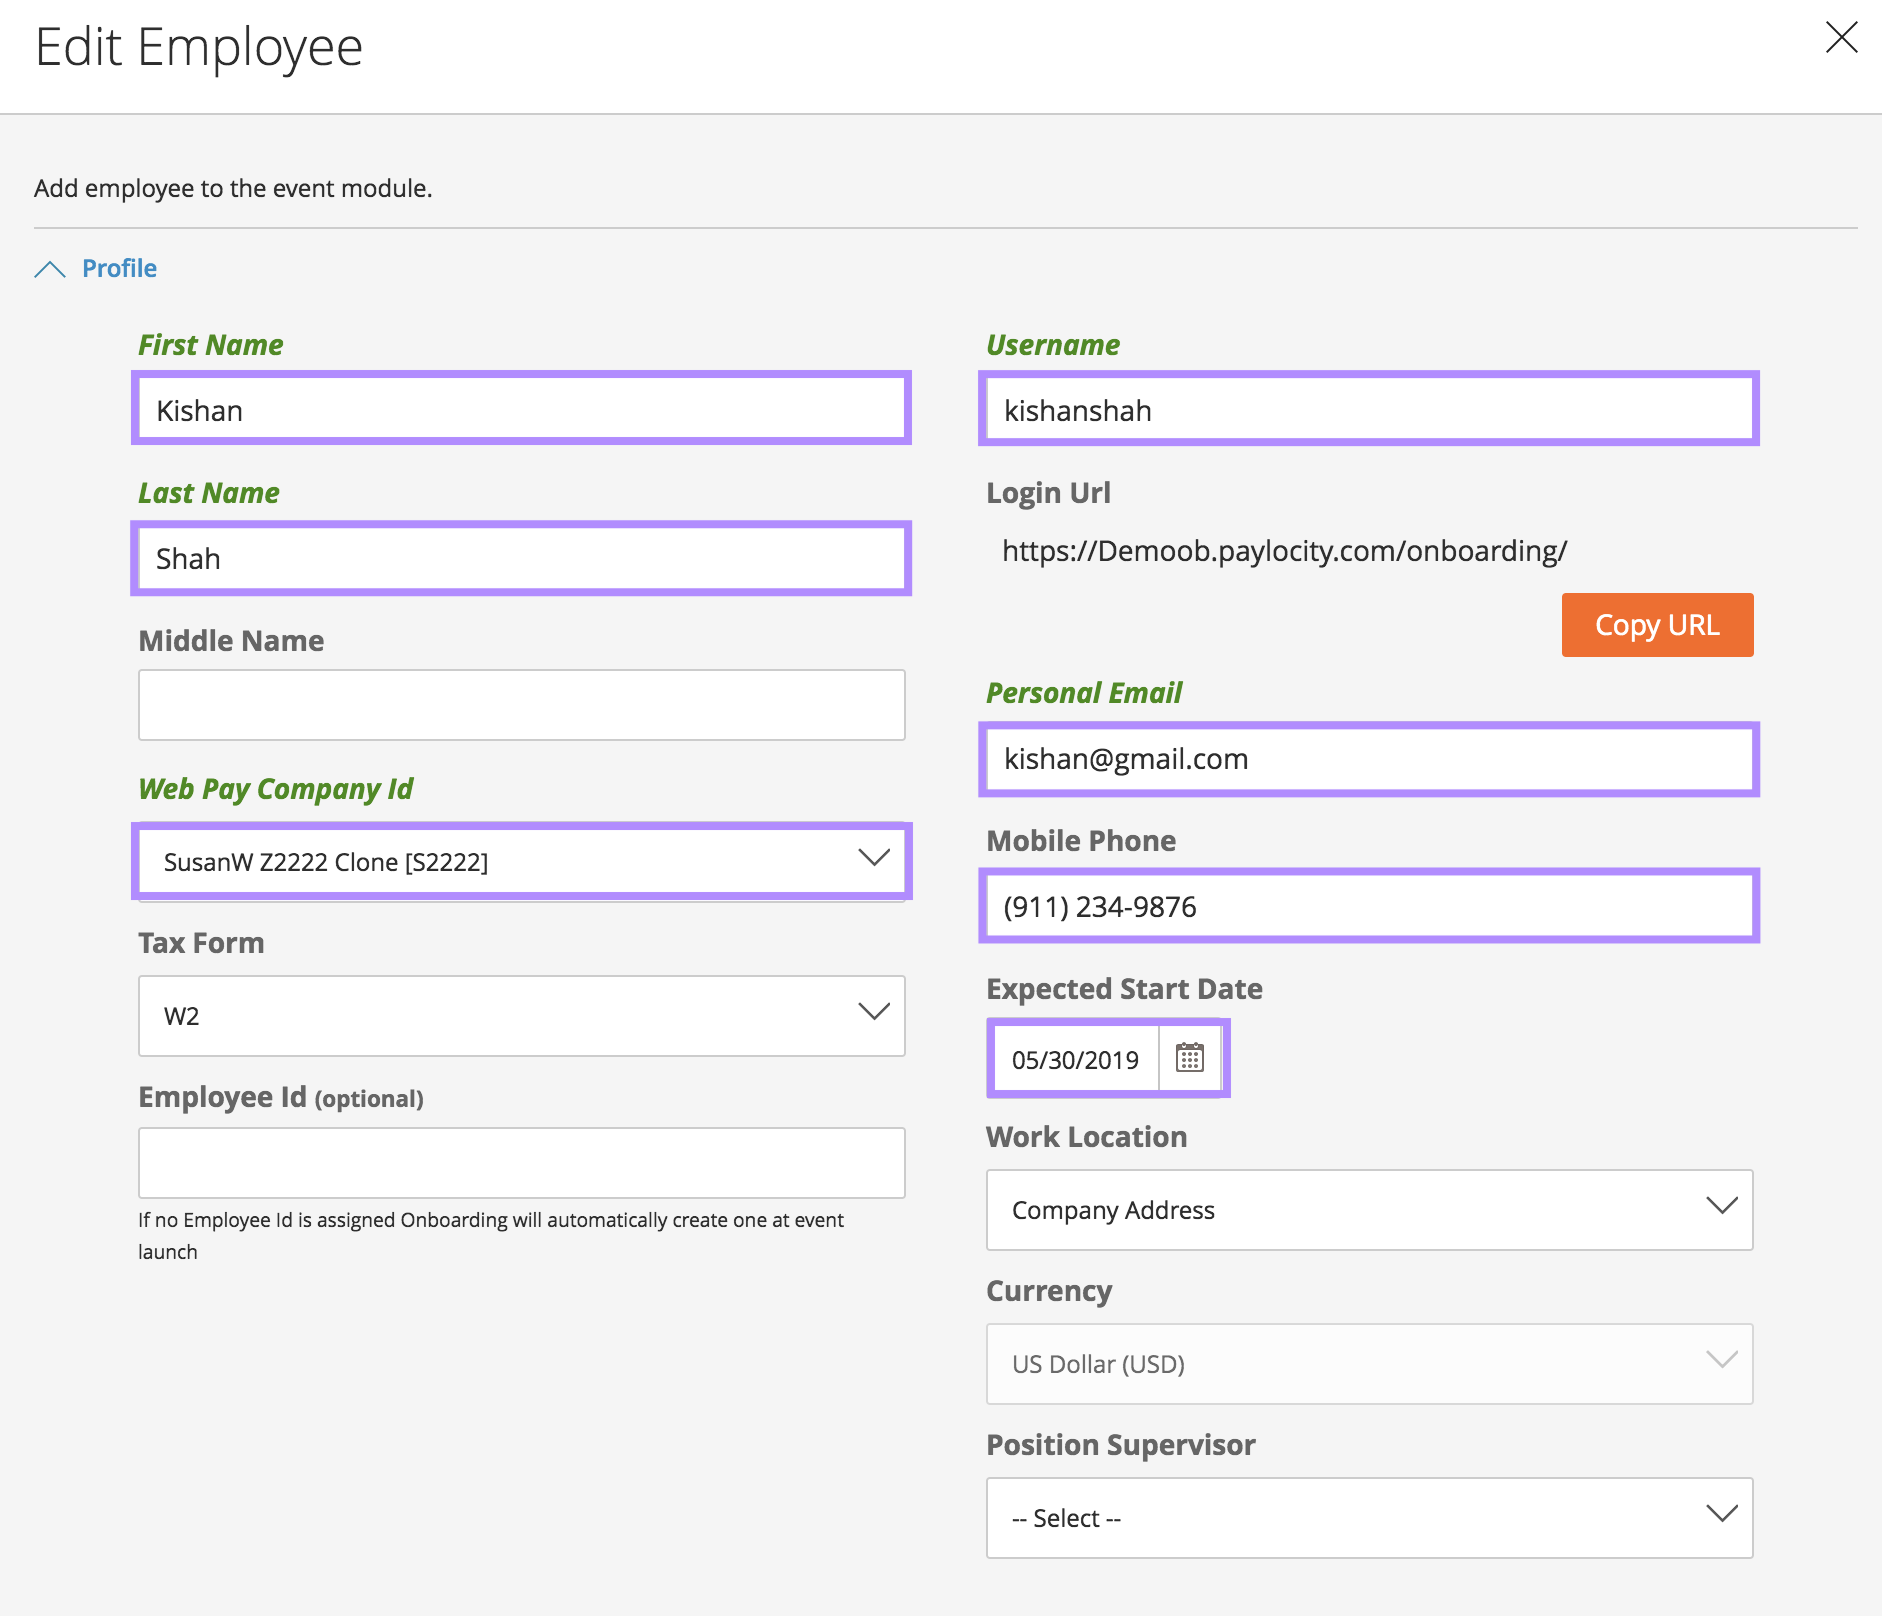 Pre-populated profile information fields on employee onboarding record in Paylocity.